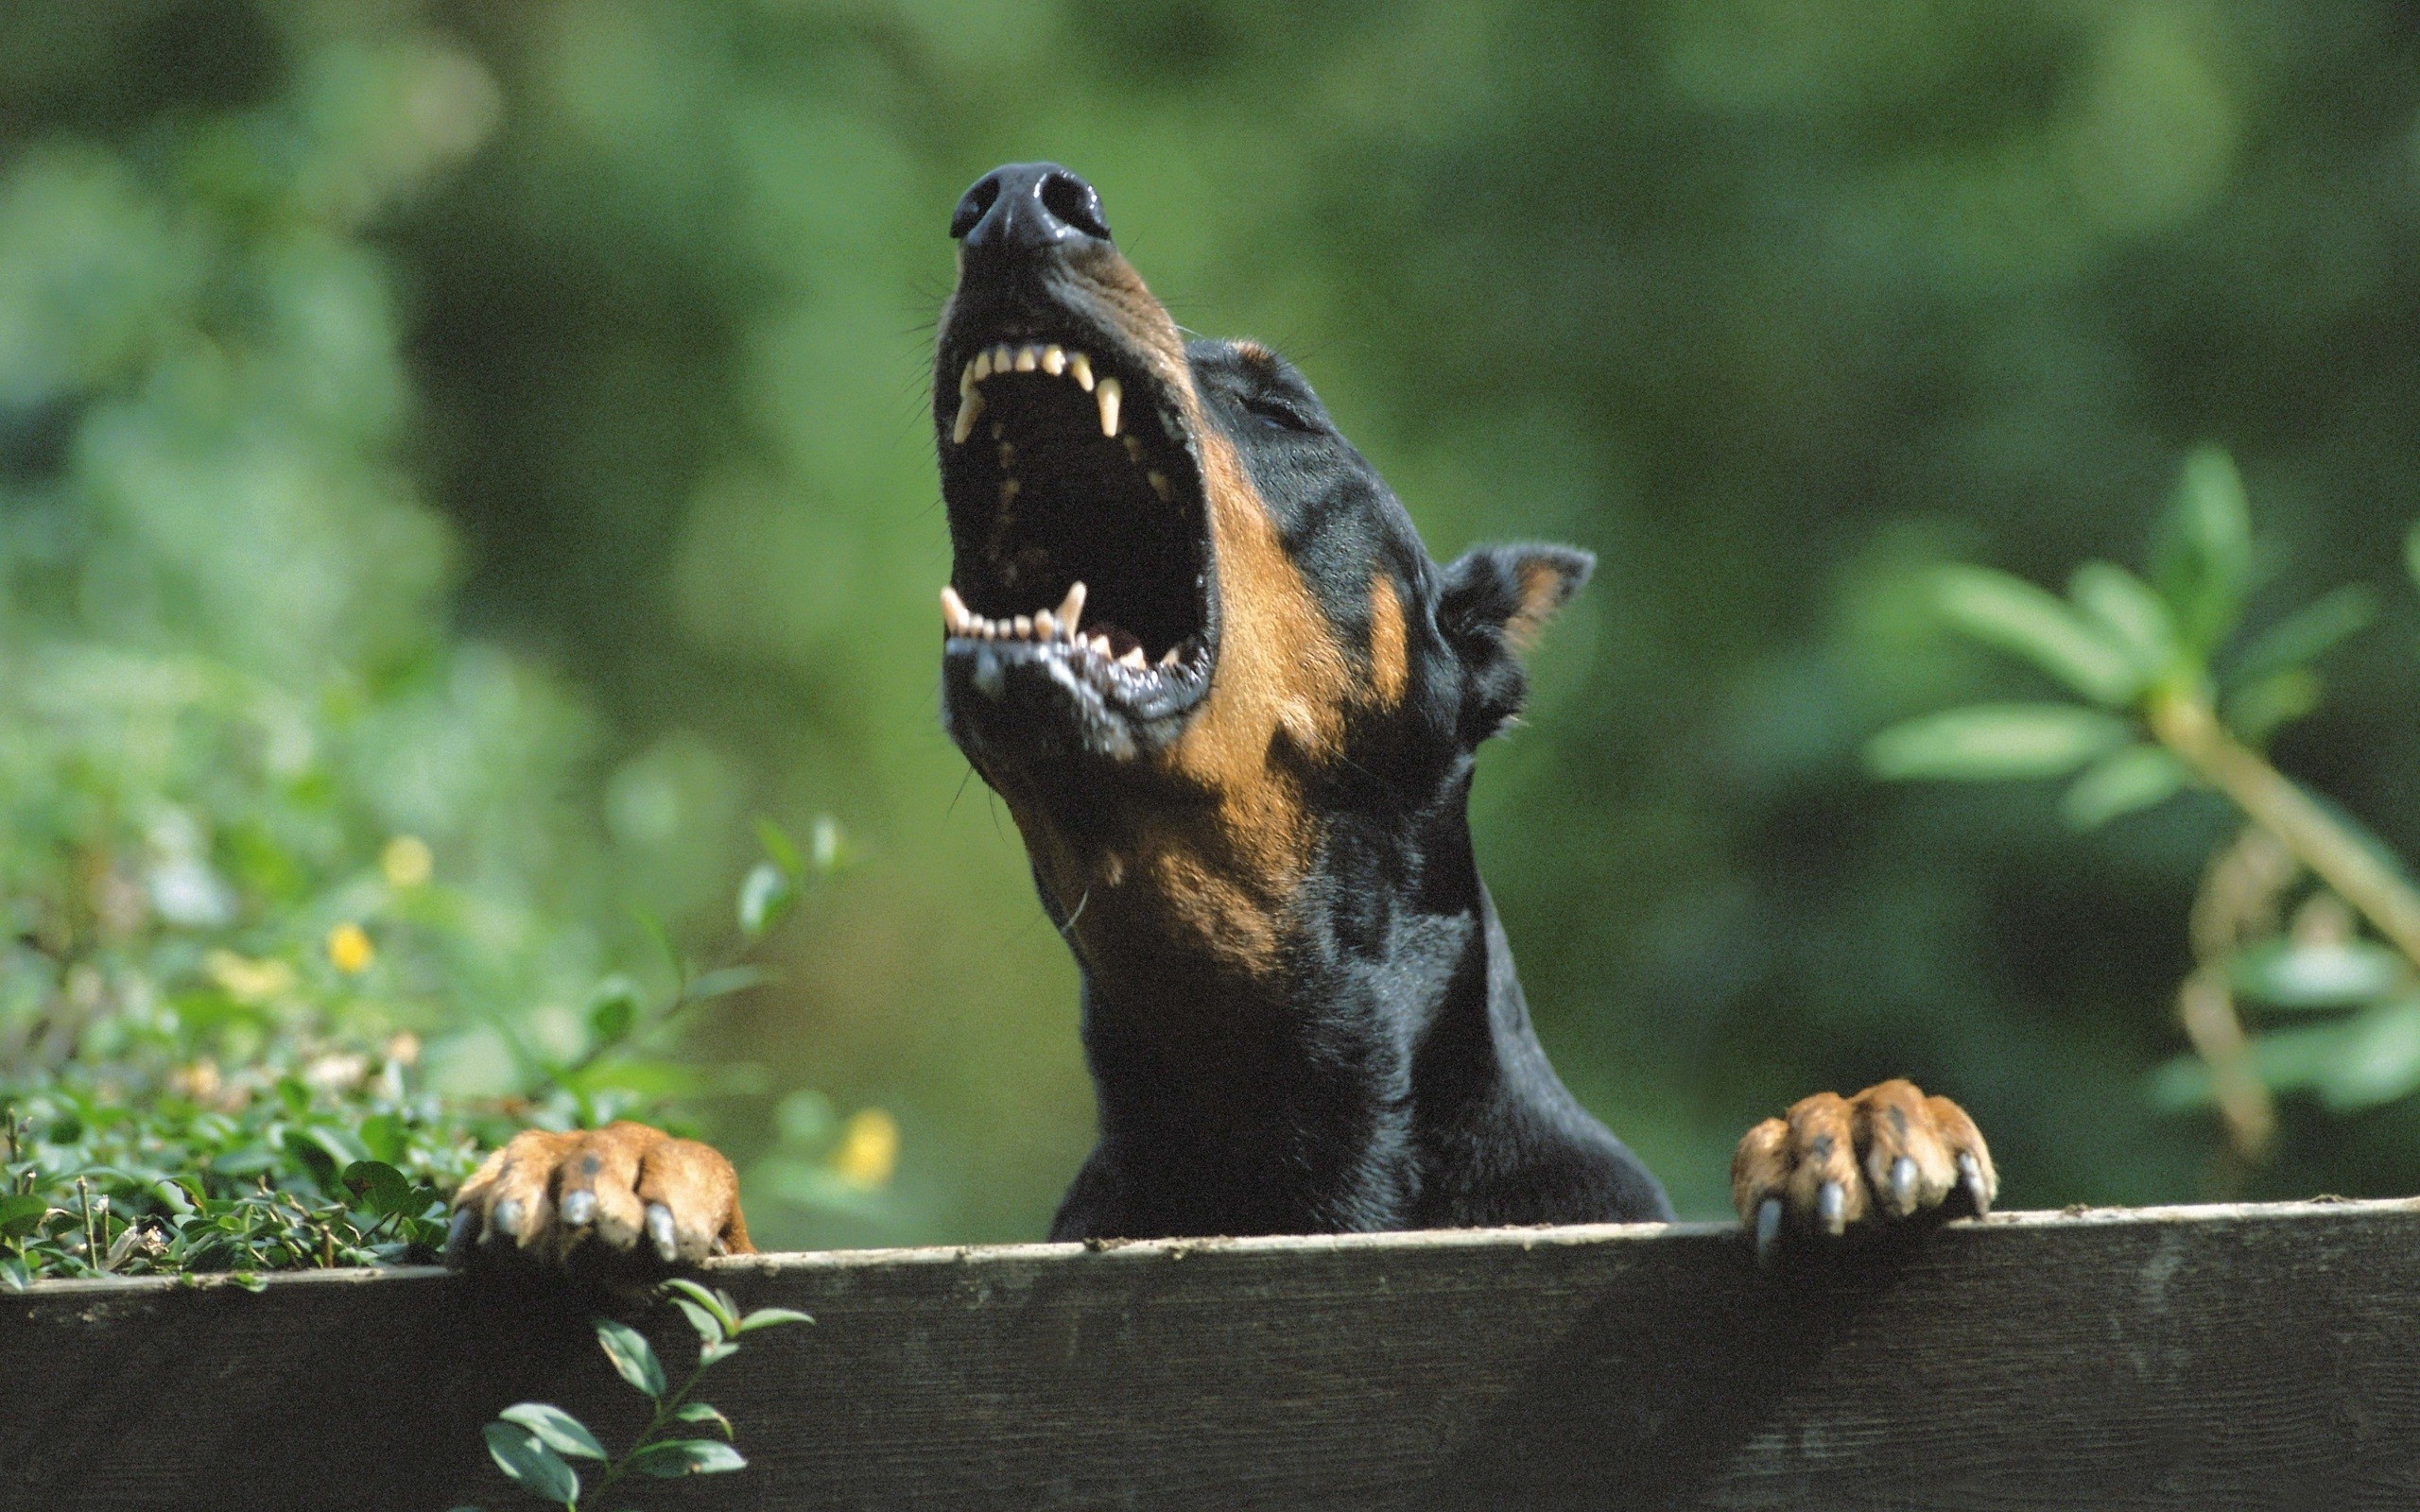 angry doberman pinscher dog Wallpapers HD / Desktop and Mobile Backgrounds